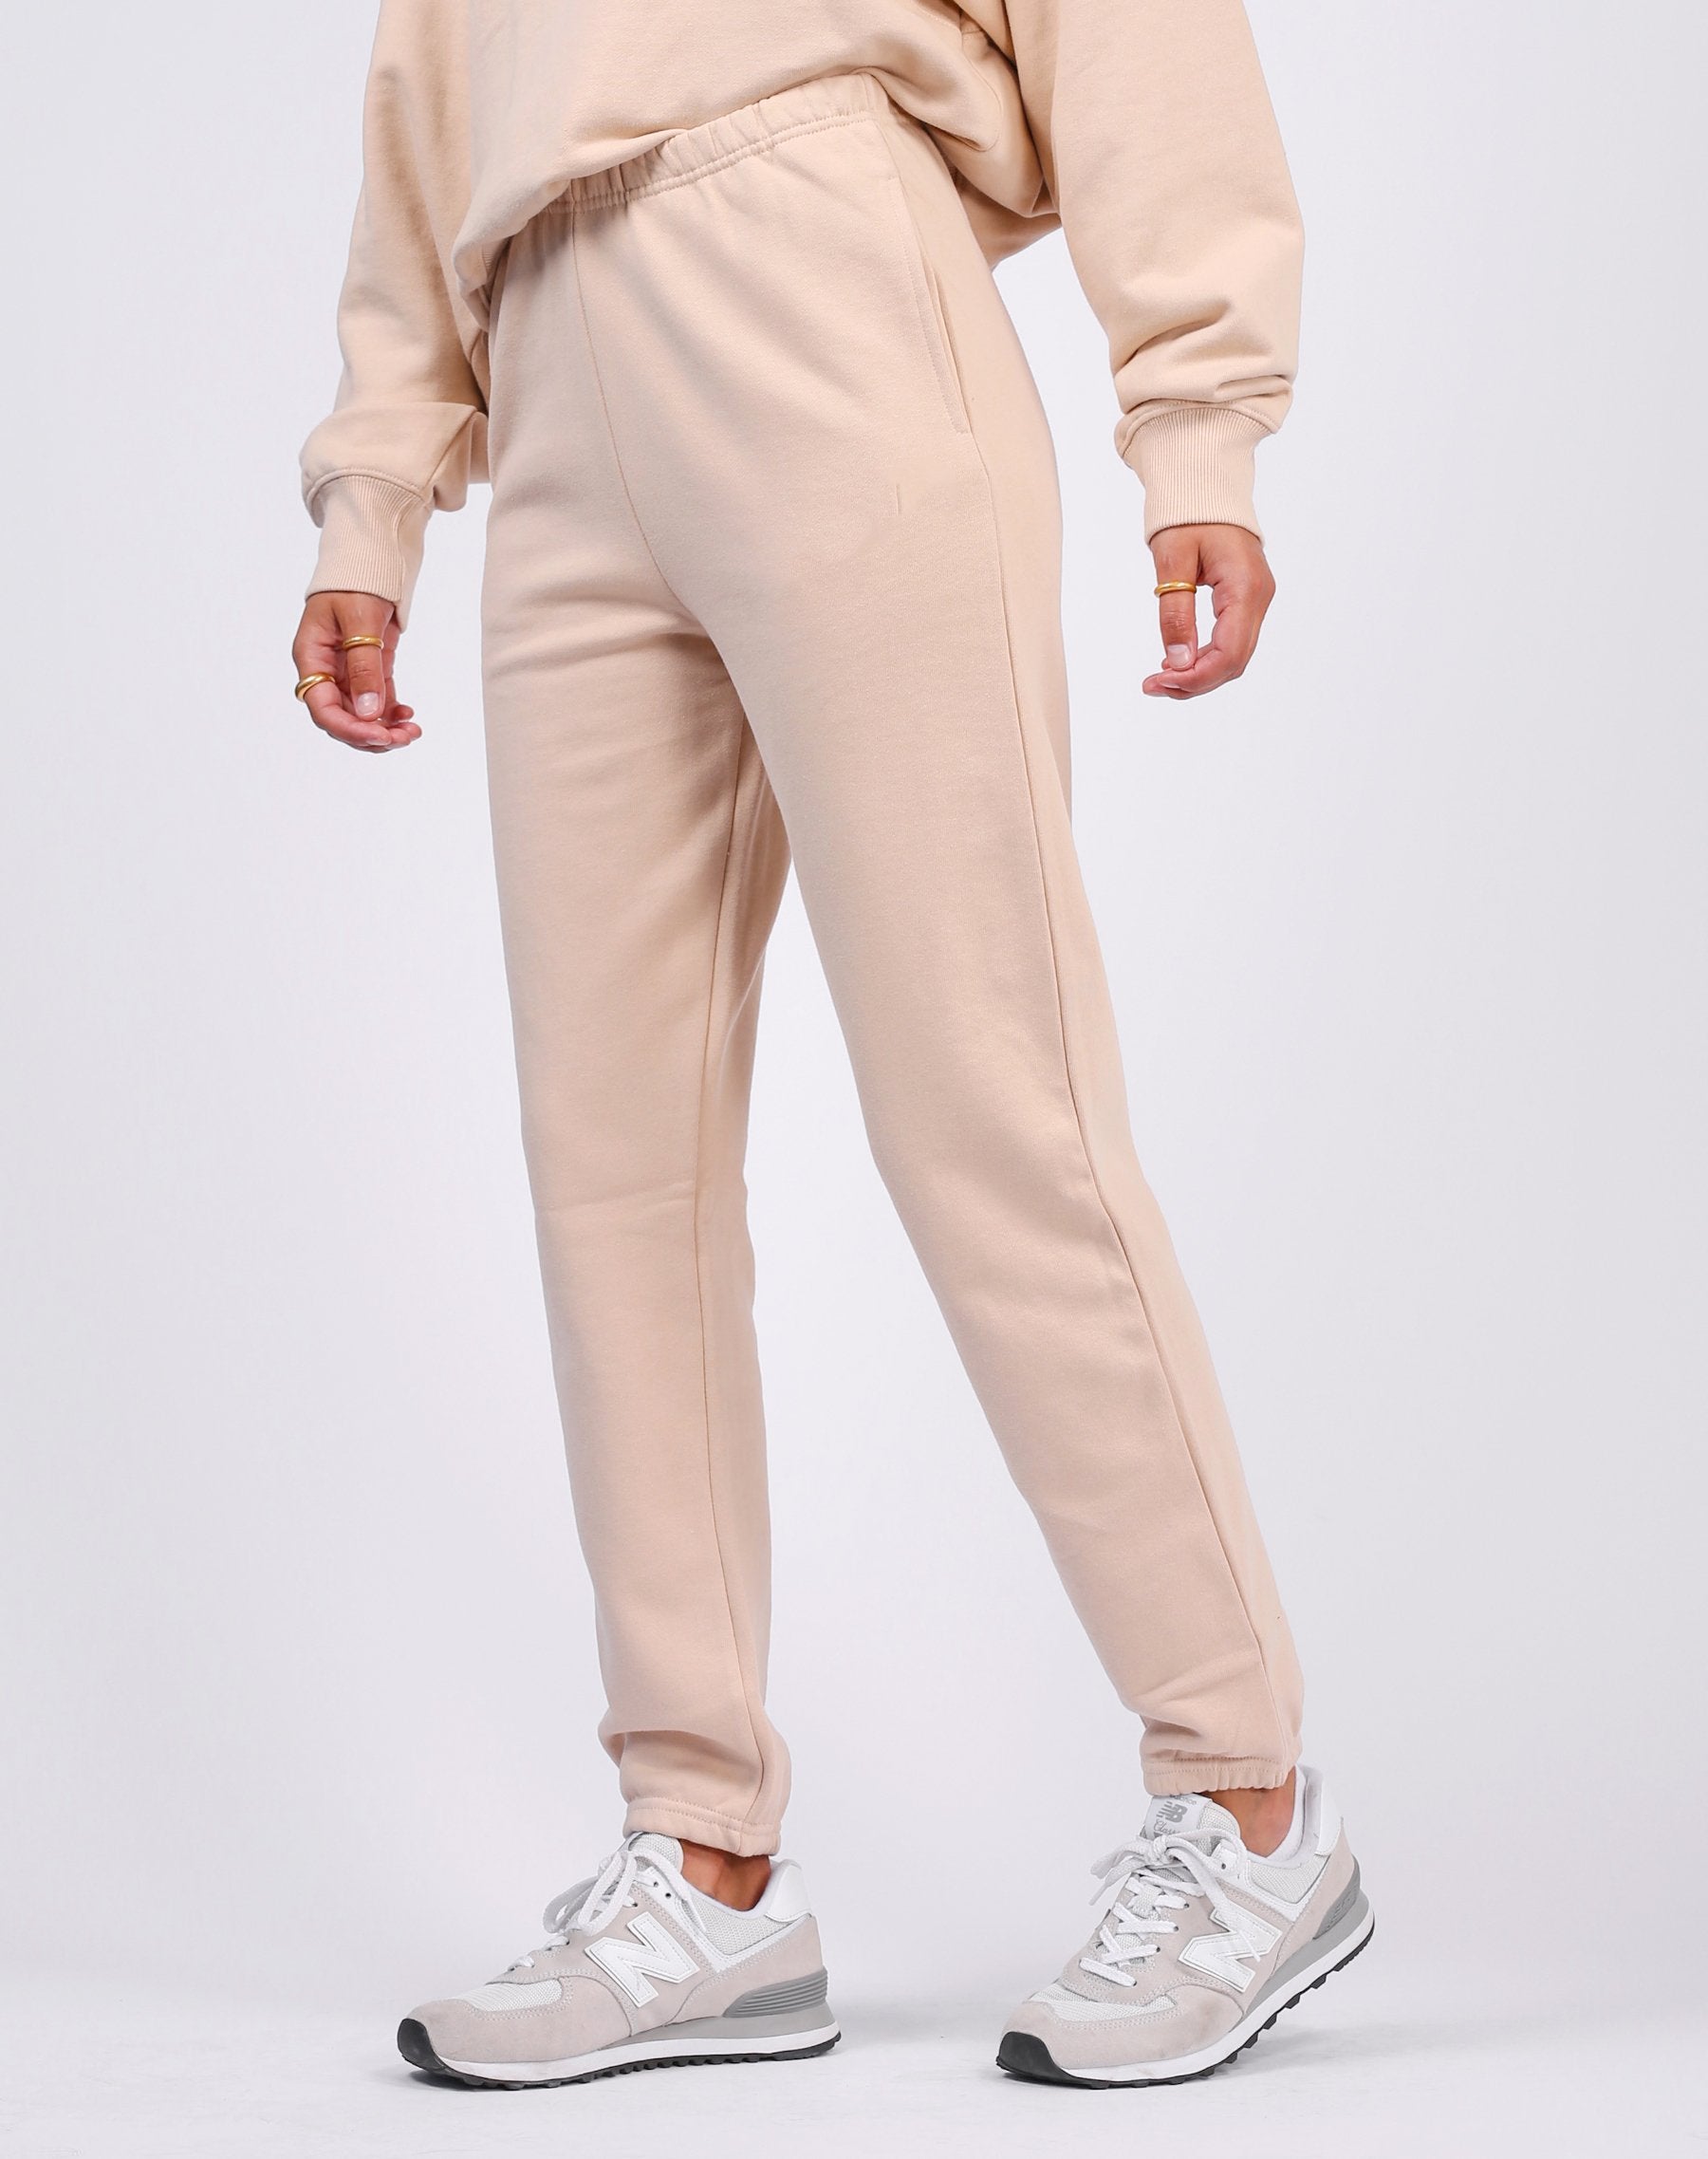 Joggers for Women  Sweatpants – THE LABEL